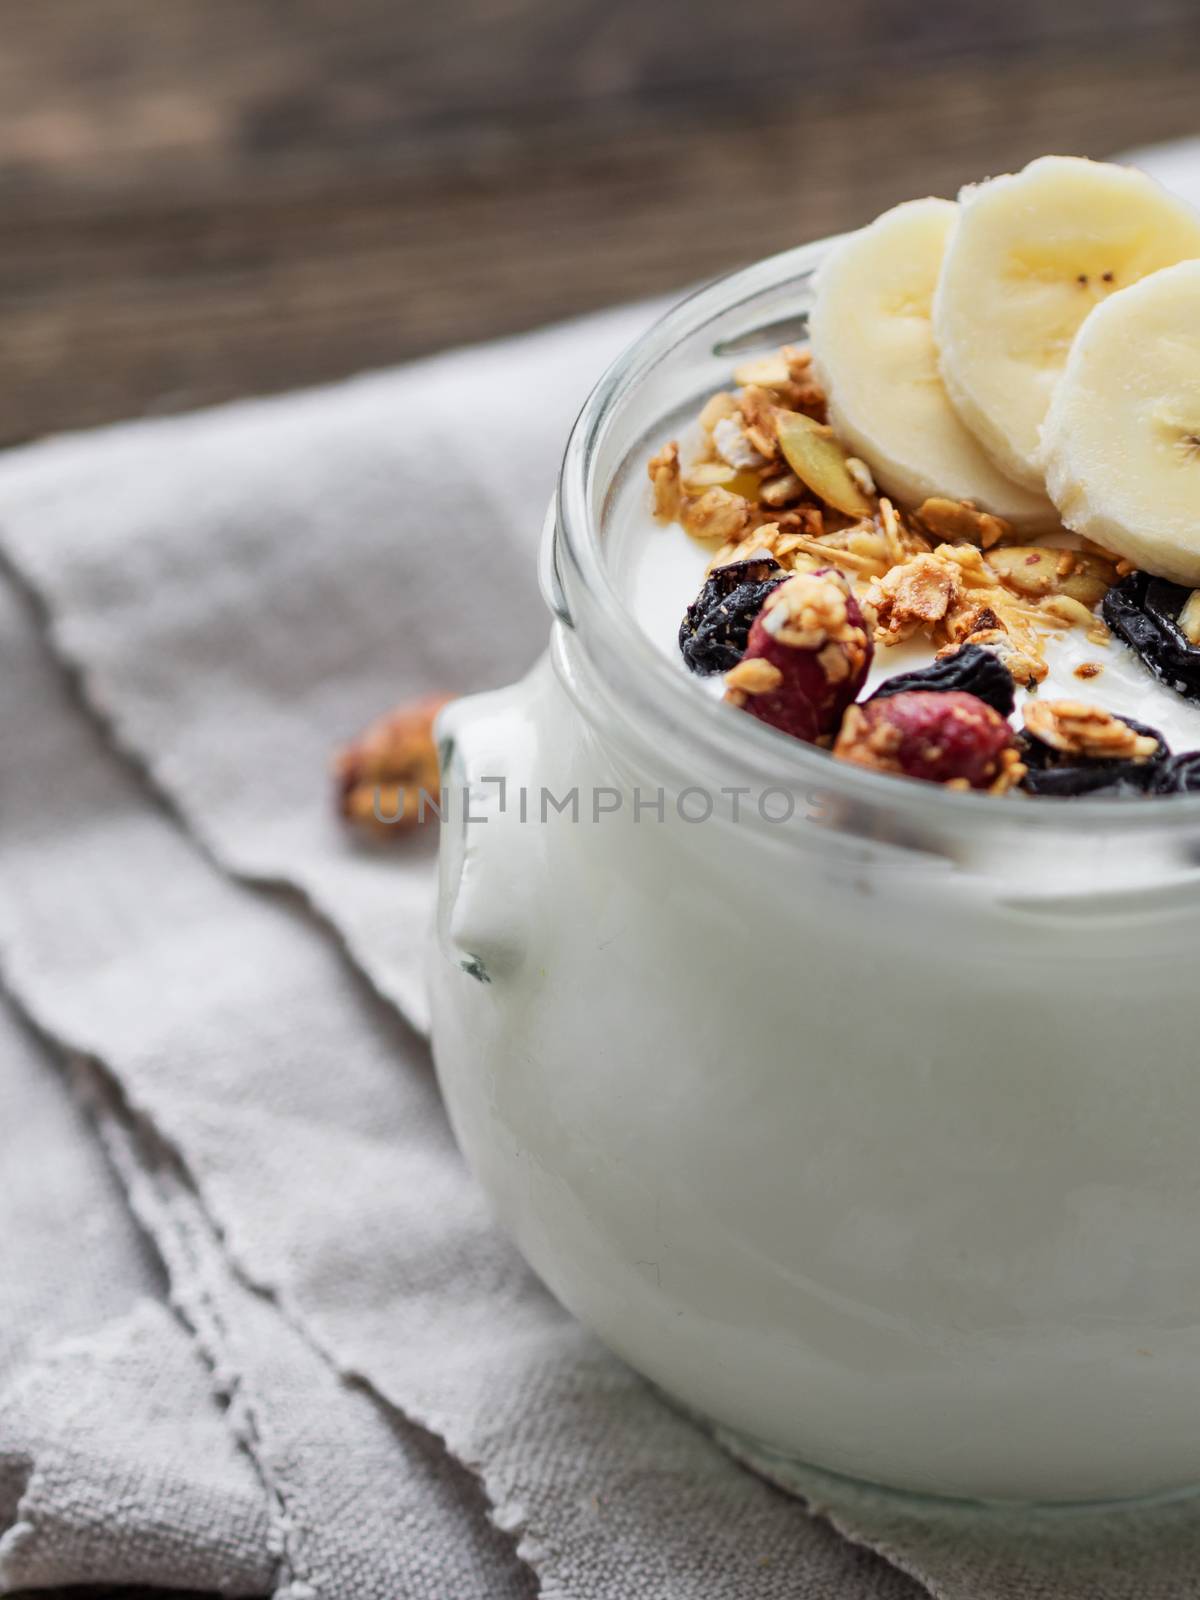 Natural homemade yogurt in a glass jar. Healthy food for breakfast with muesli. Jar with granola and banana slices on linen tablecloth on on wooden table.